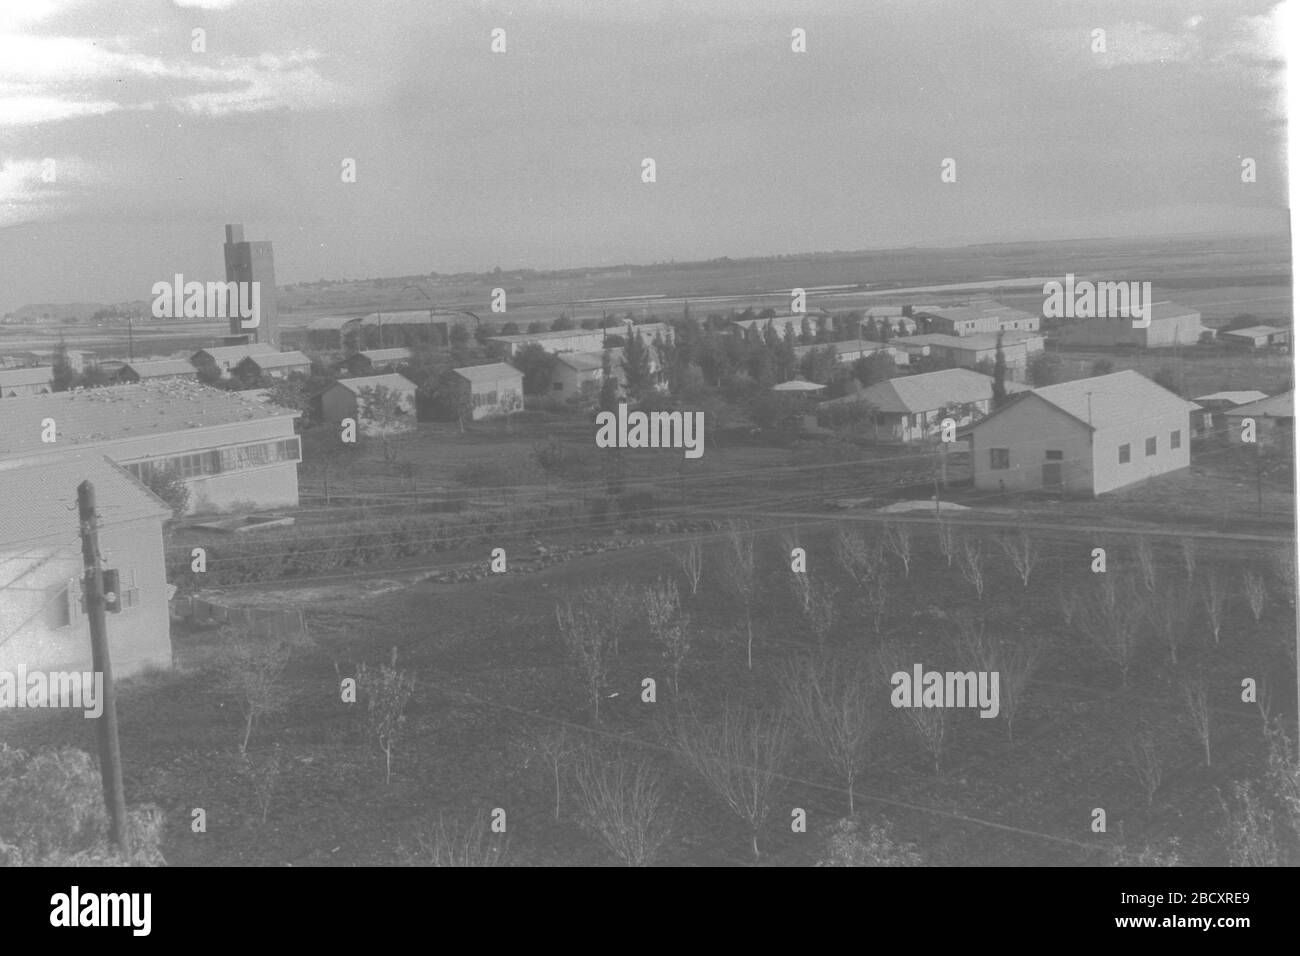 English A View Of Kibbutz Sde Nahum In The Jezreel Valley U E I O U U O C U Ss O E I C I I O I U E U Ss O N E U 30 June 1946 This Is Available From National Photo Collection Of Israel Photography